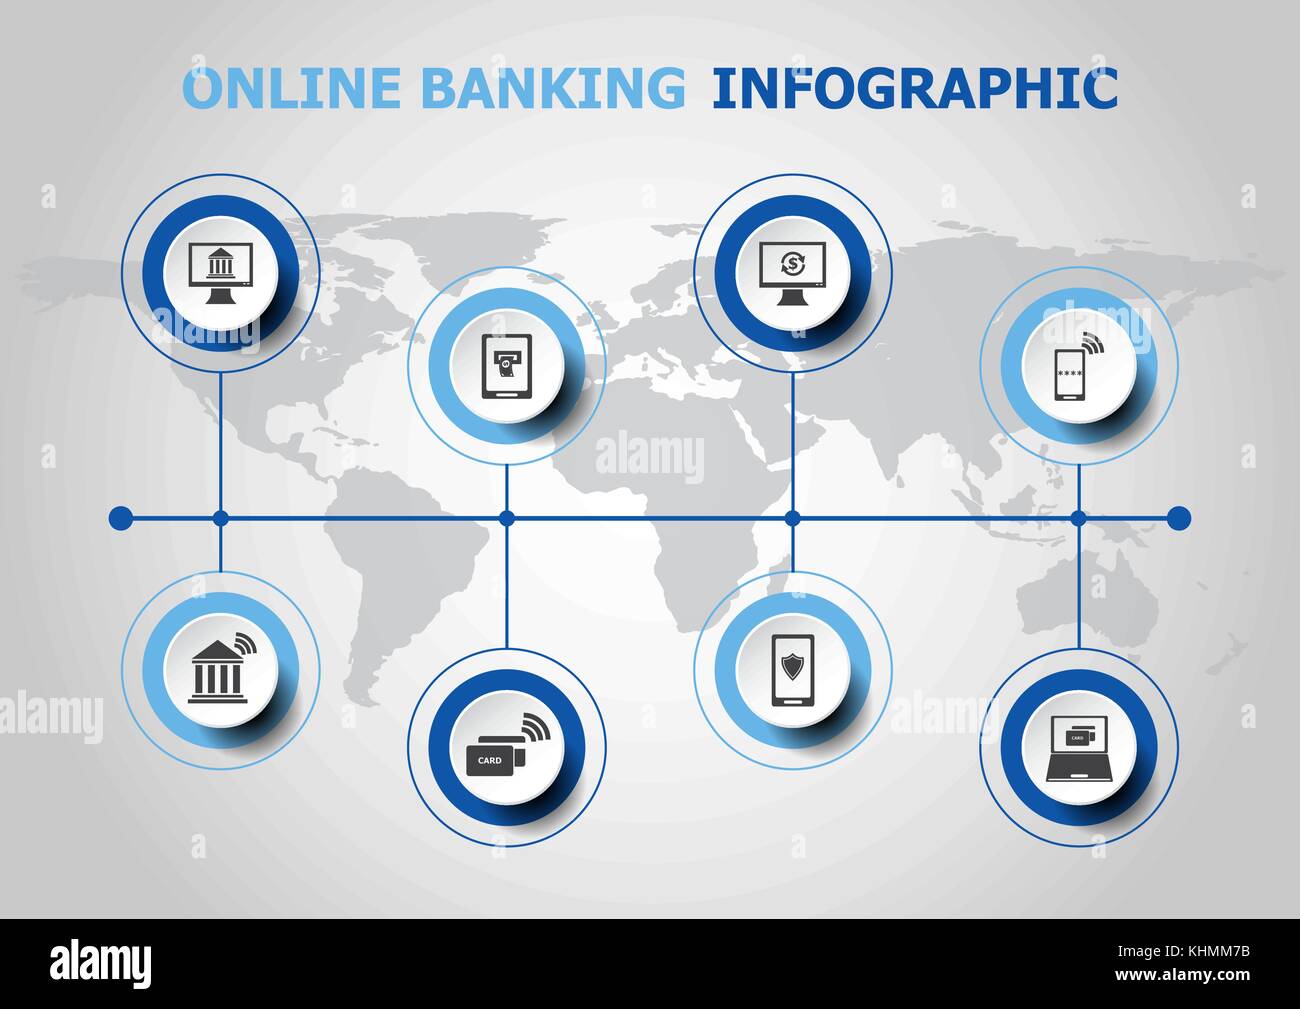 Infographic design with online banking icons, stock vector Stock Vector